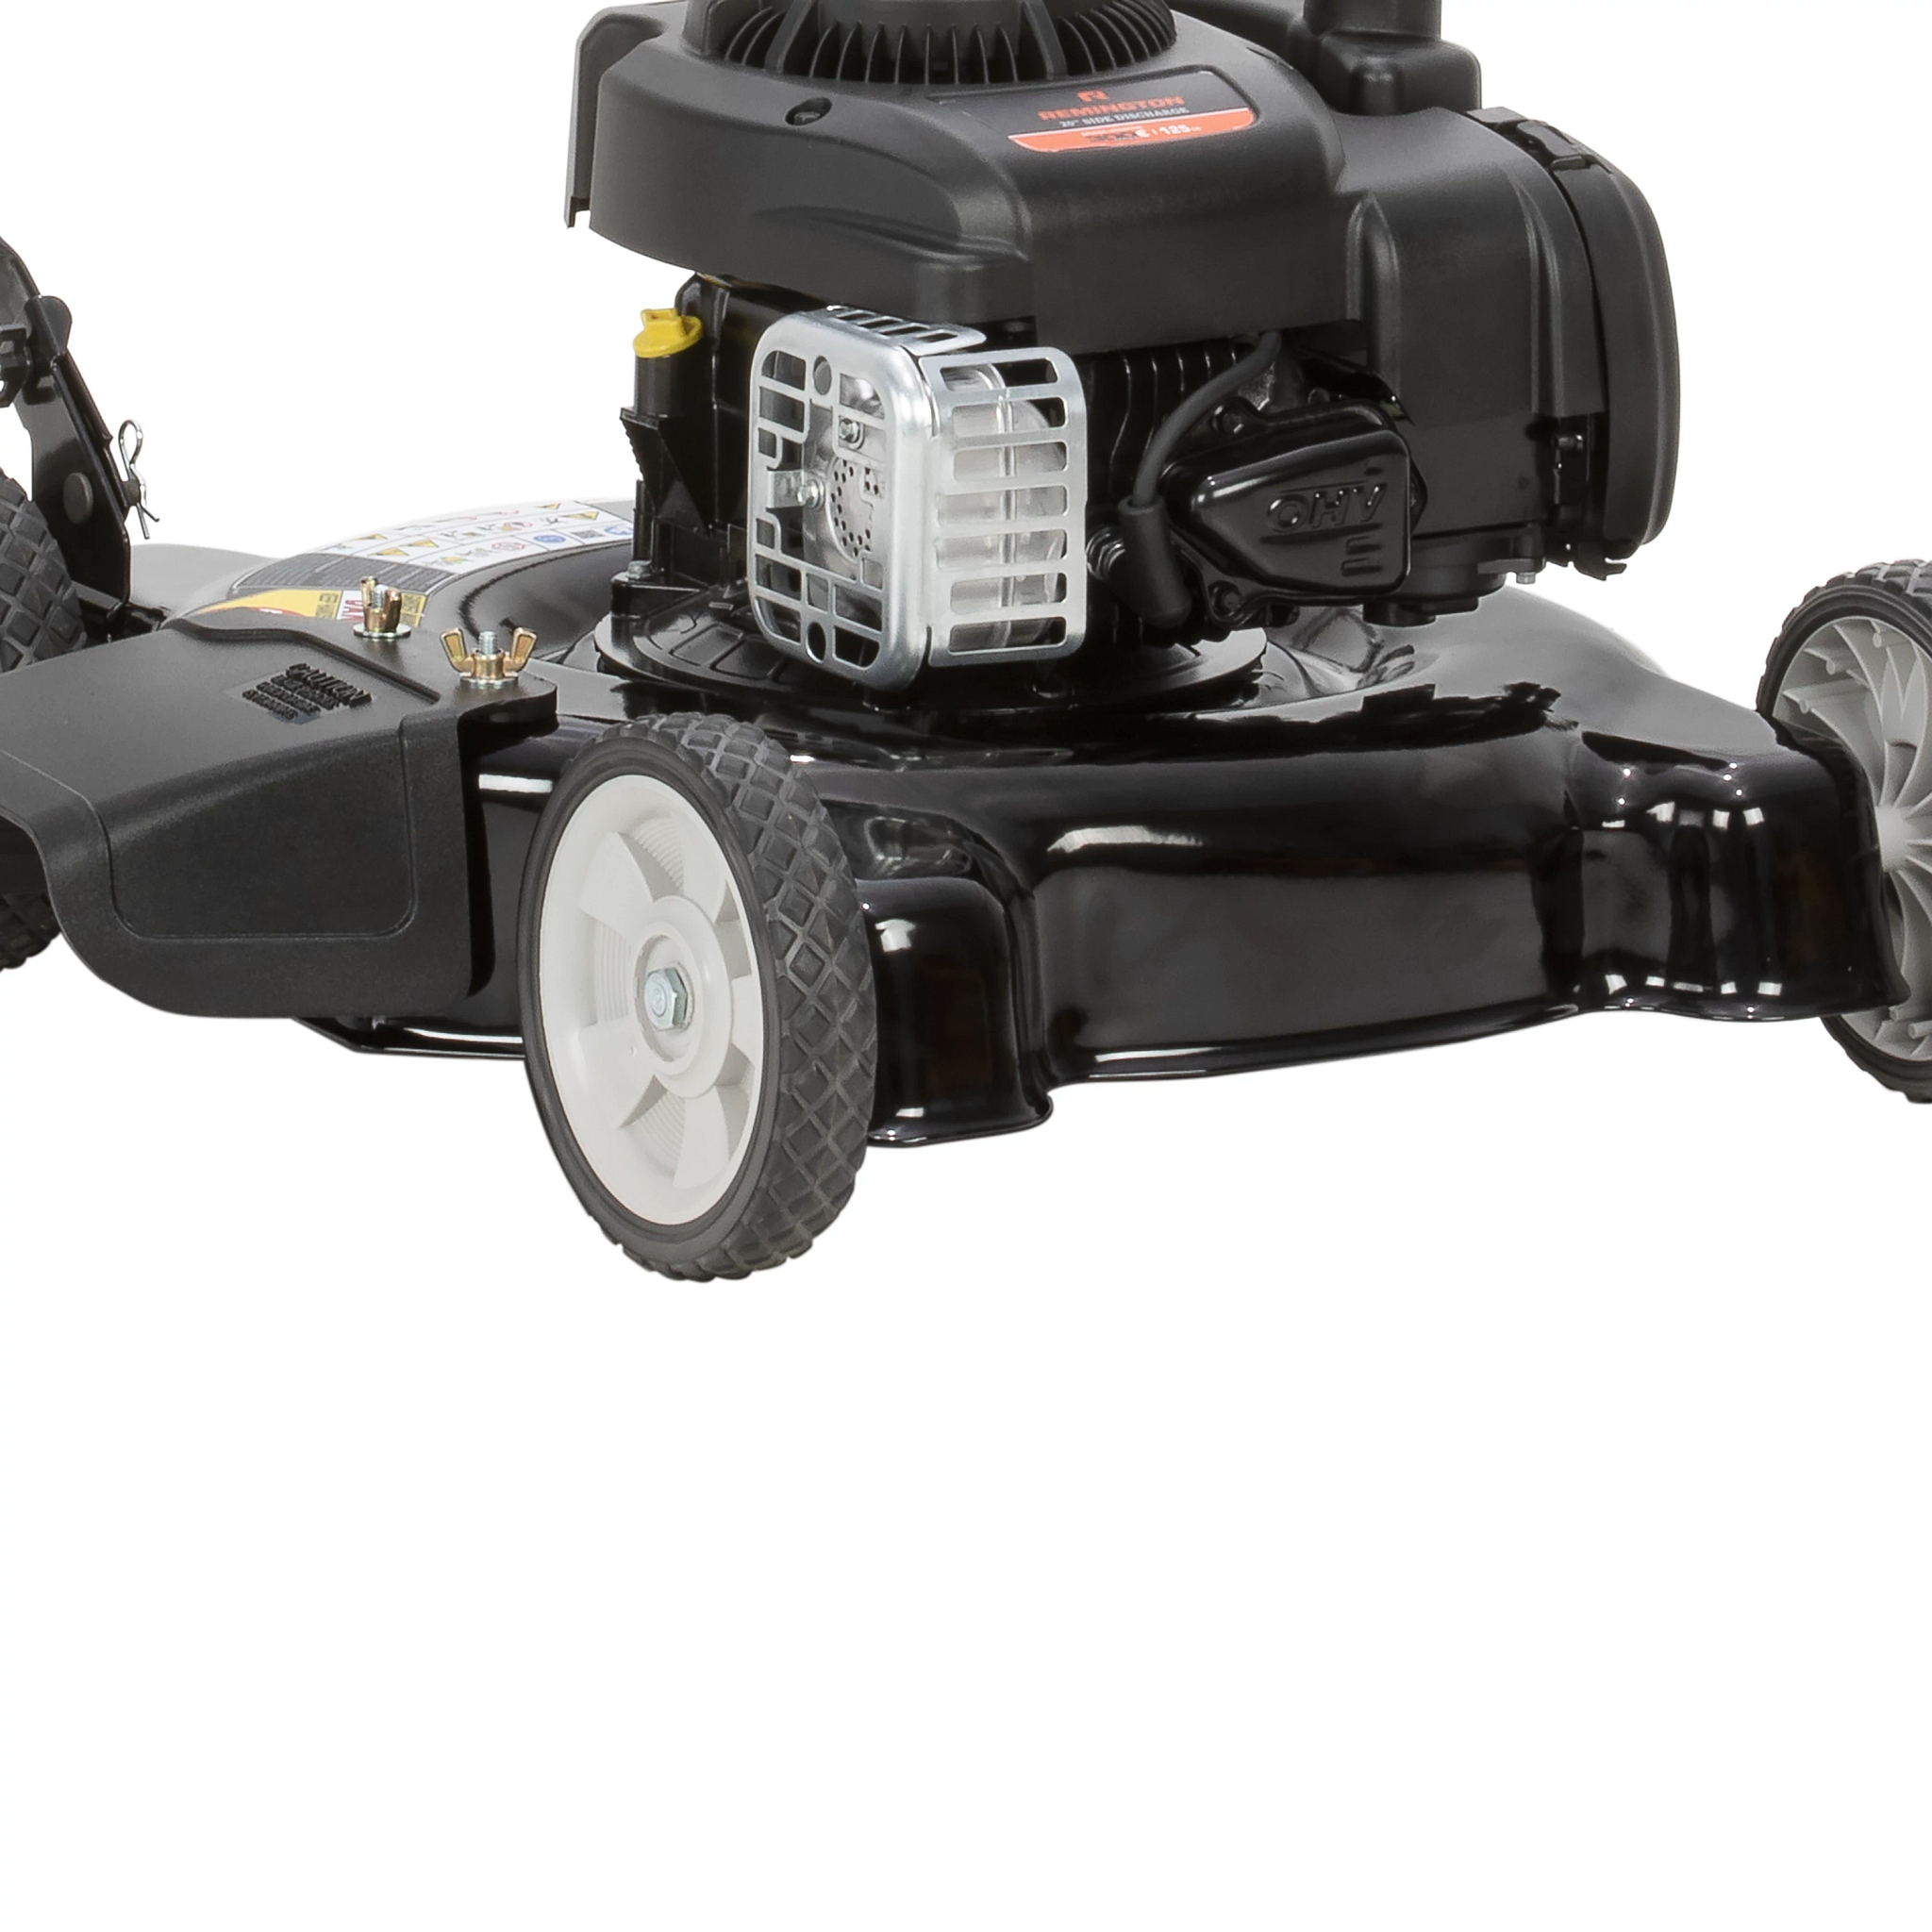 Remington 20" Push Lawn Mower with 125cc Briggs & Stratton Gas Powered Engine - image 4 of 8